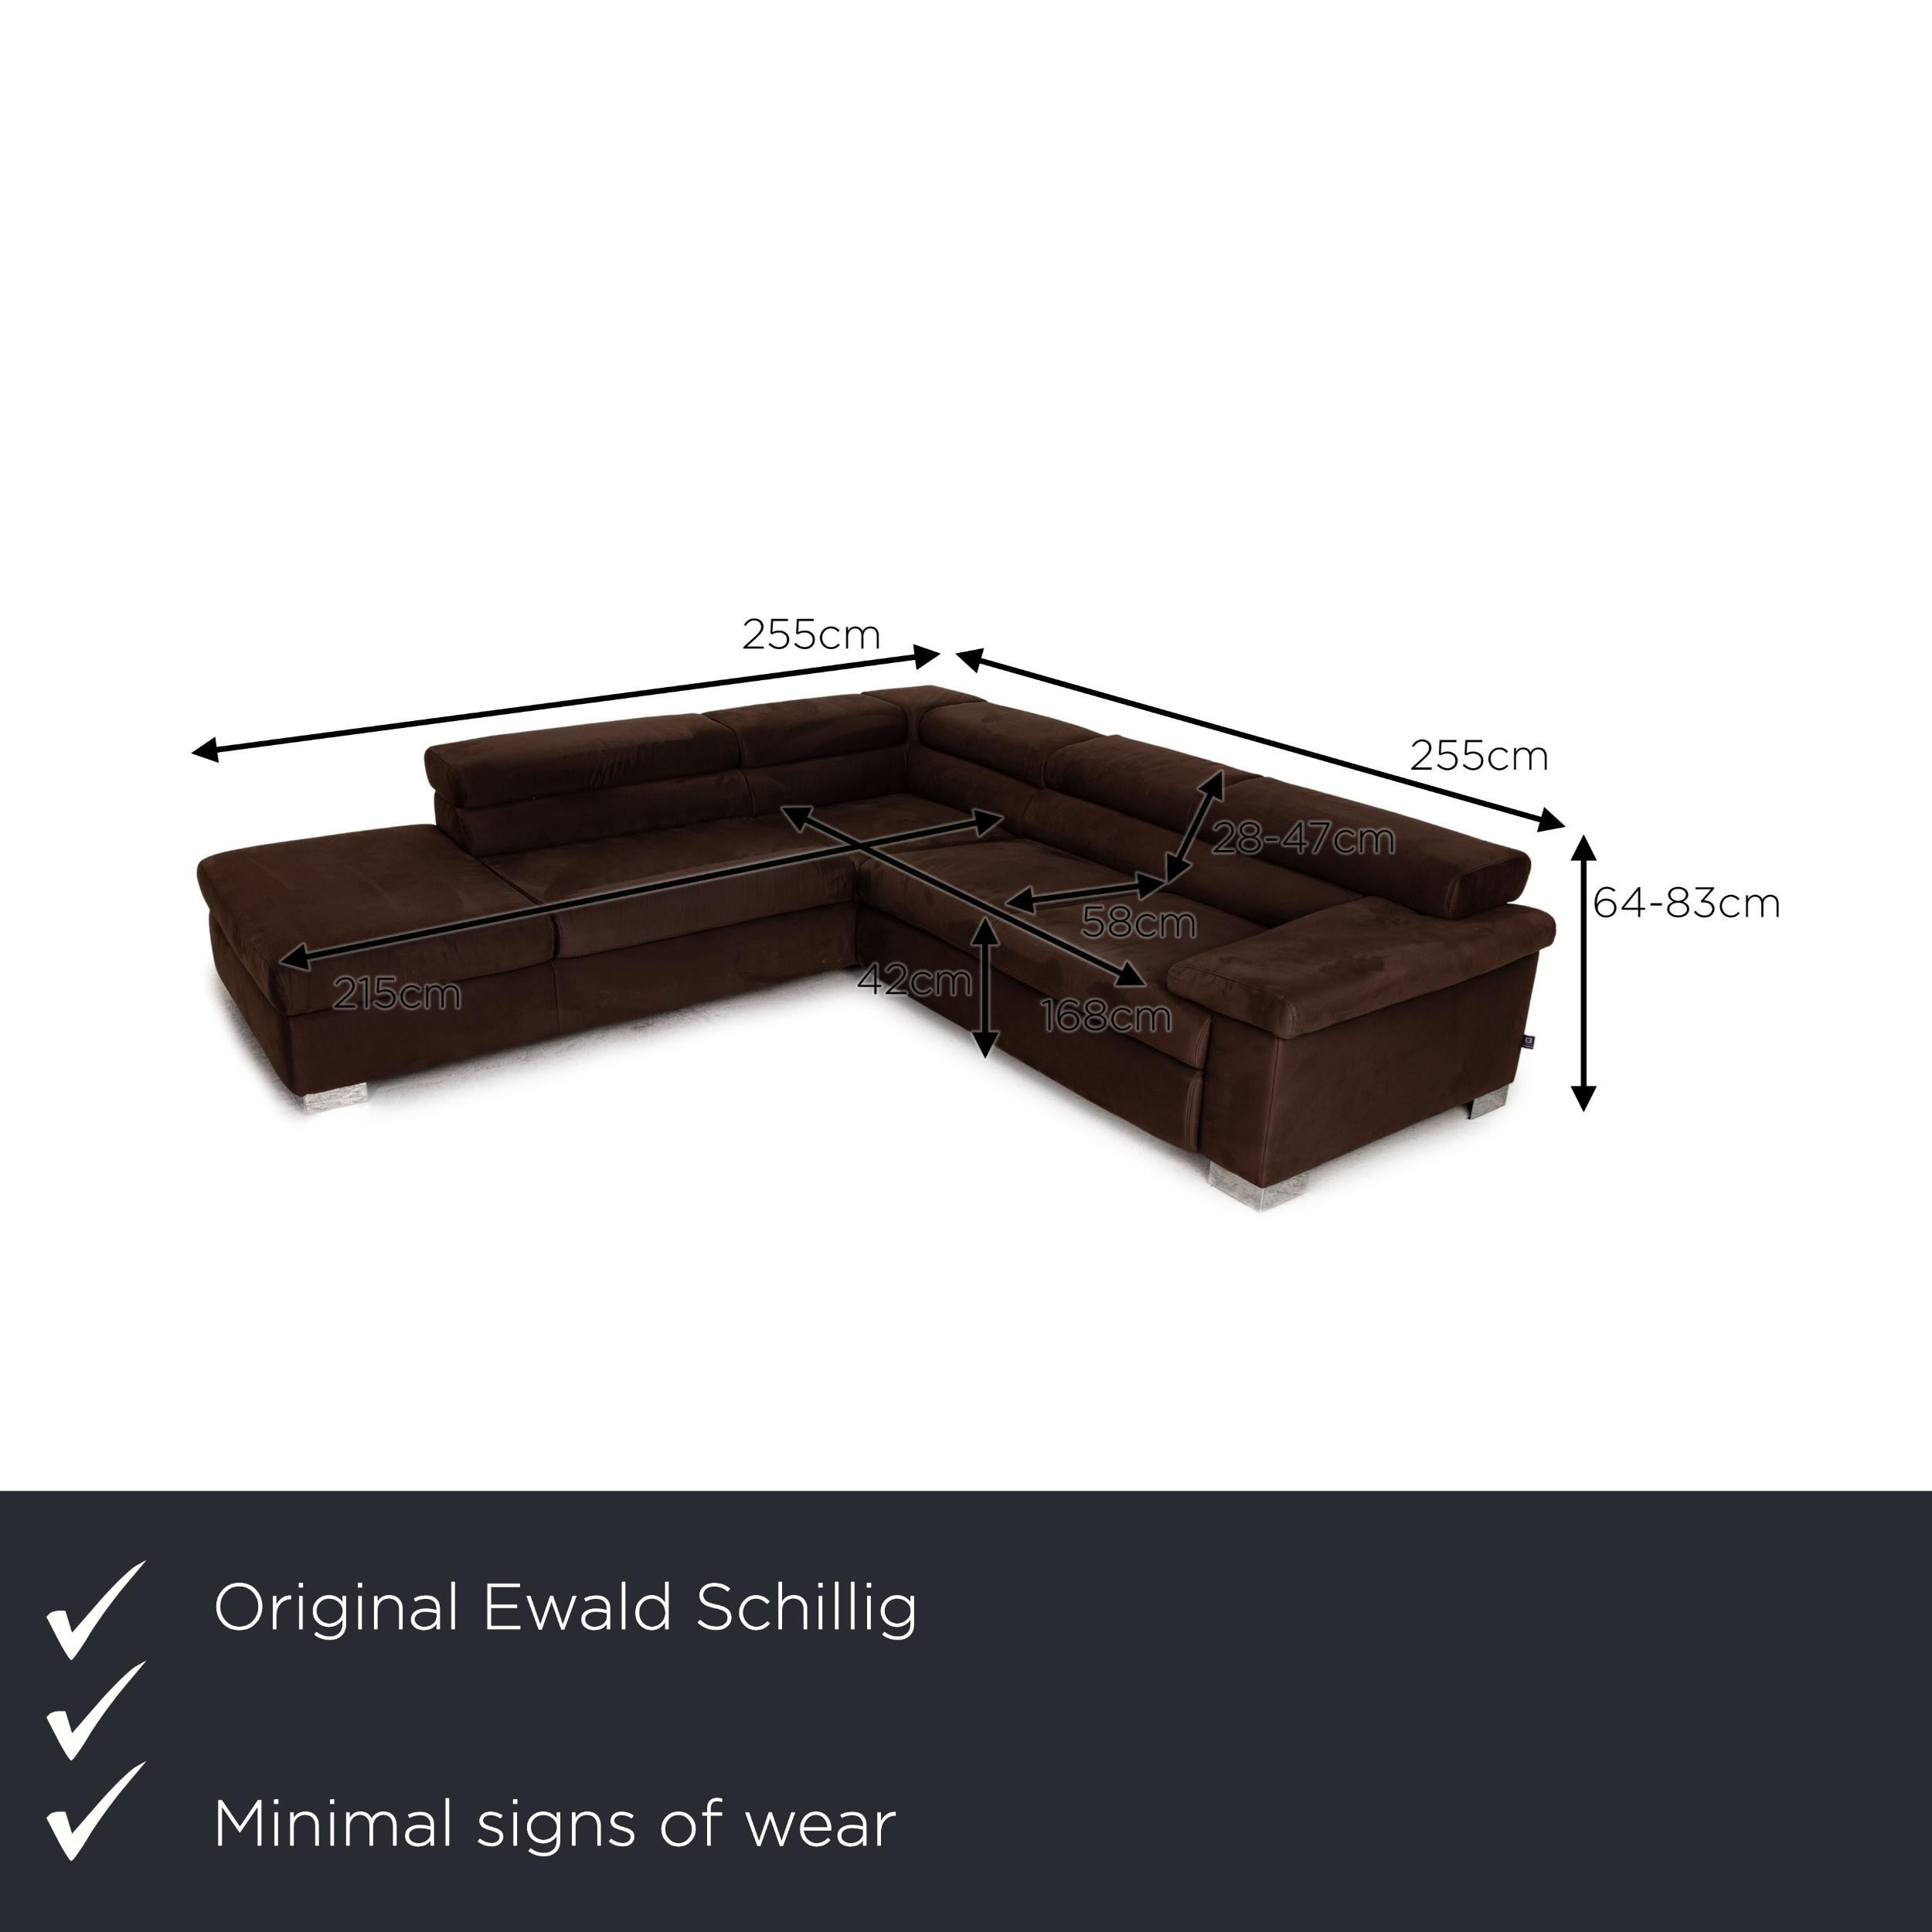 We present to you an Ewald Schillig leather sofa brown corner sofa function couch.

Product measurements in centimeters:

Depth: 245
Width: 255
Height: 64
Seat height: 42
Rest height: 53
Seat depth: 58
Seat width: 215
Back height: